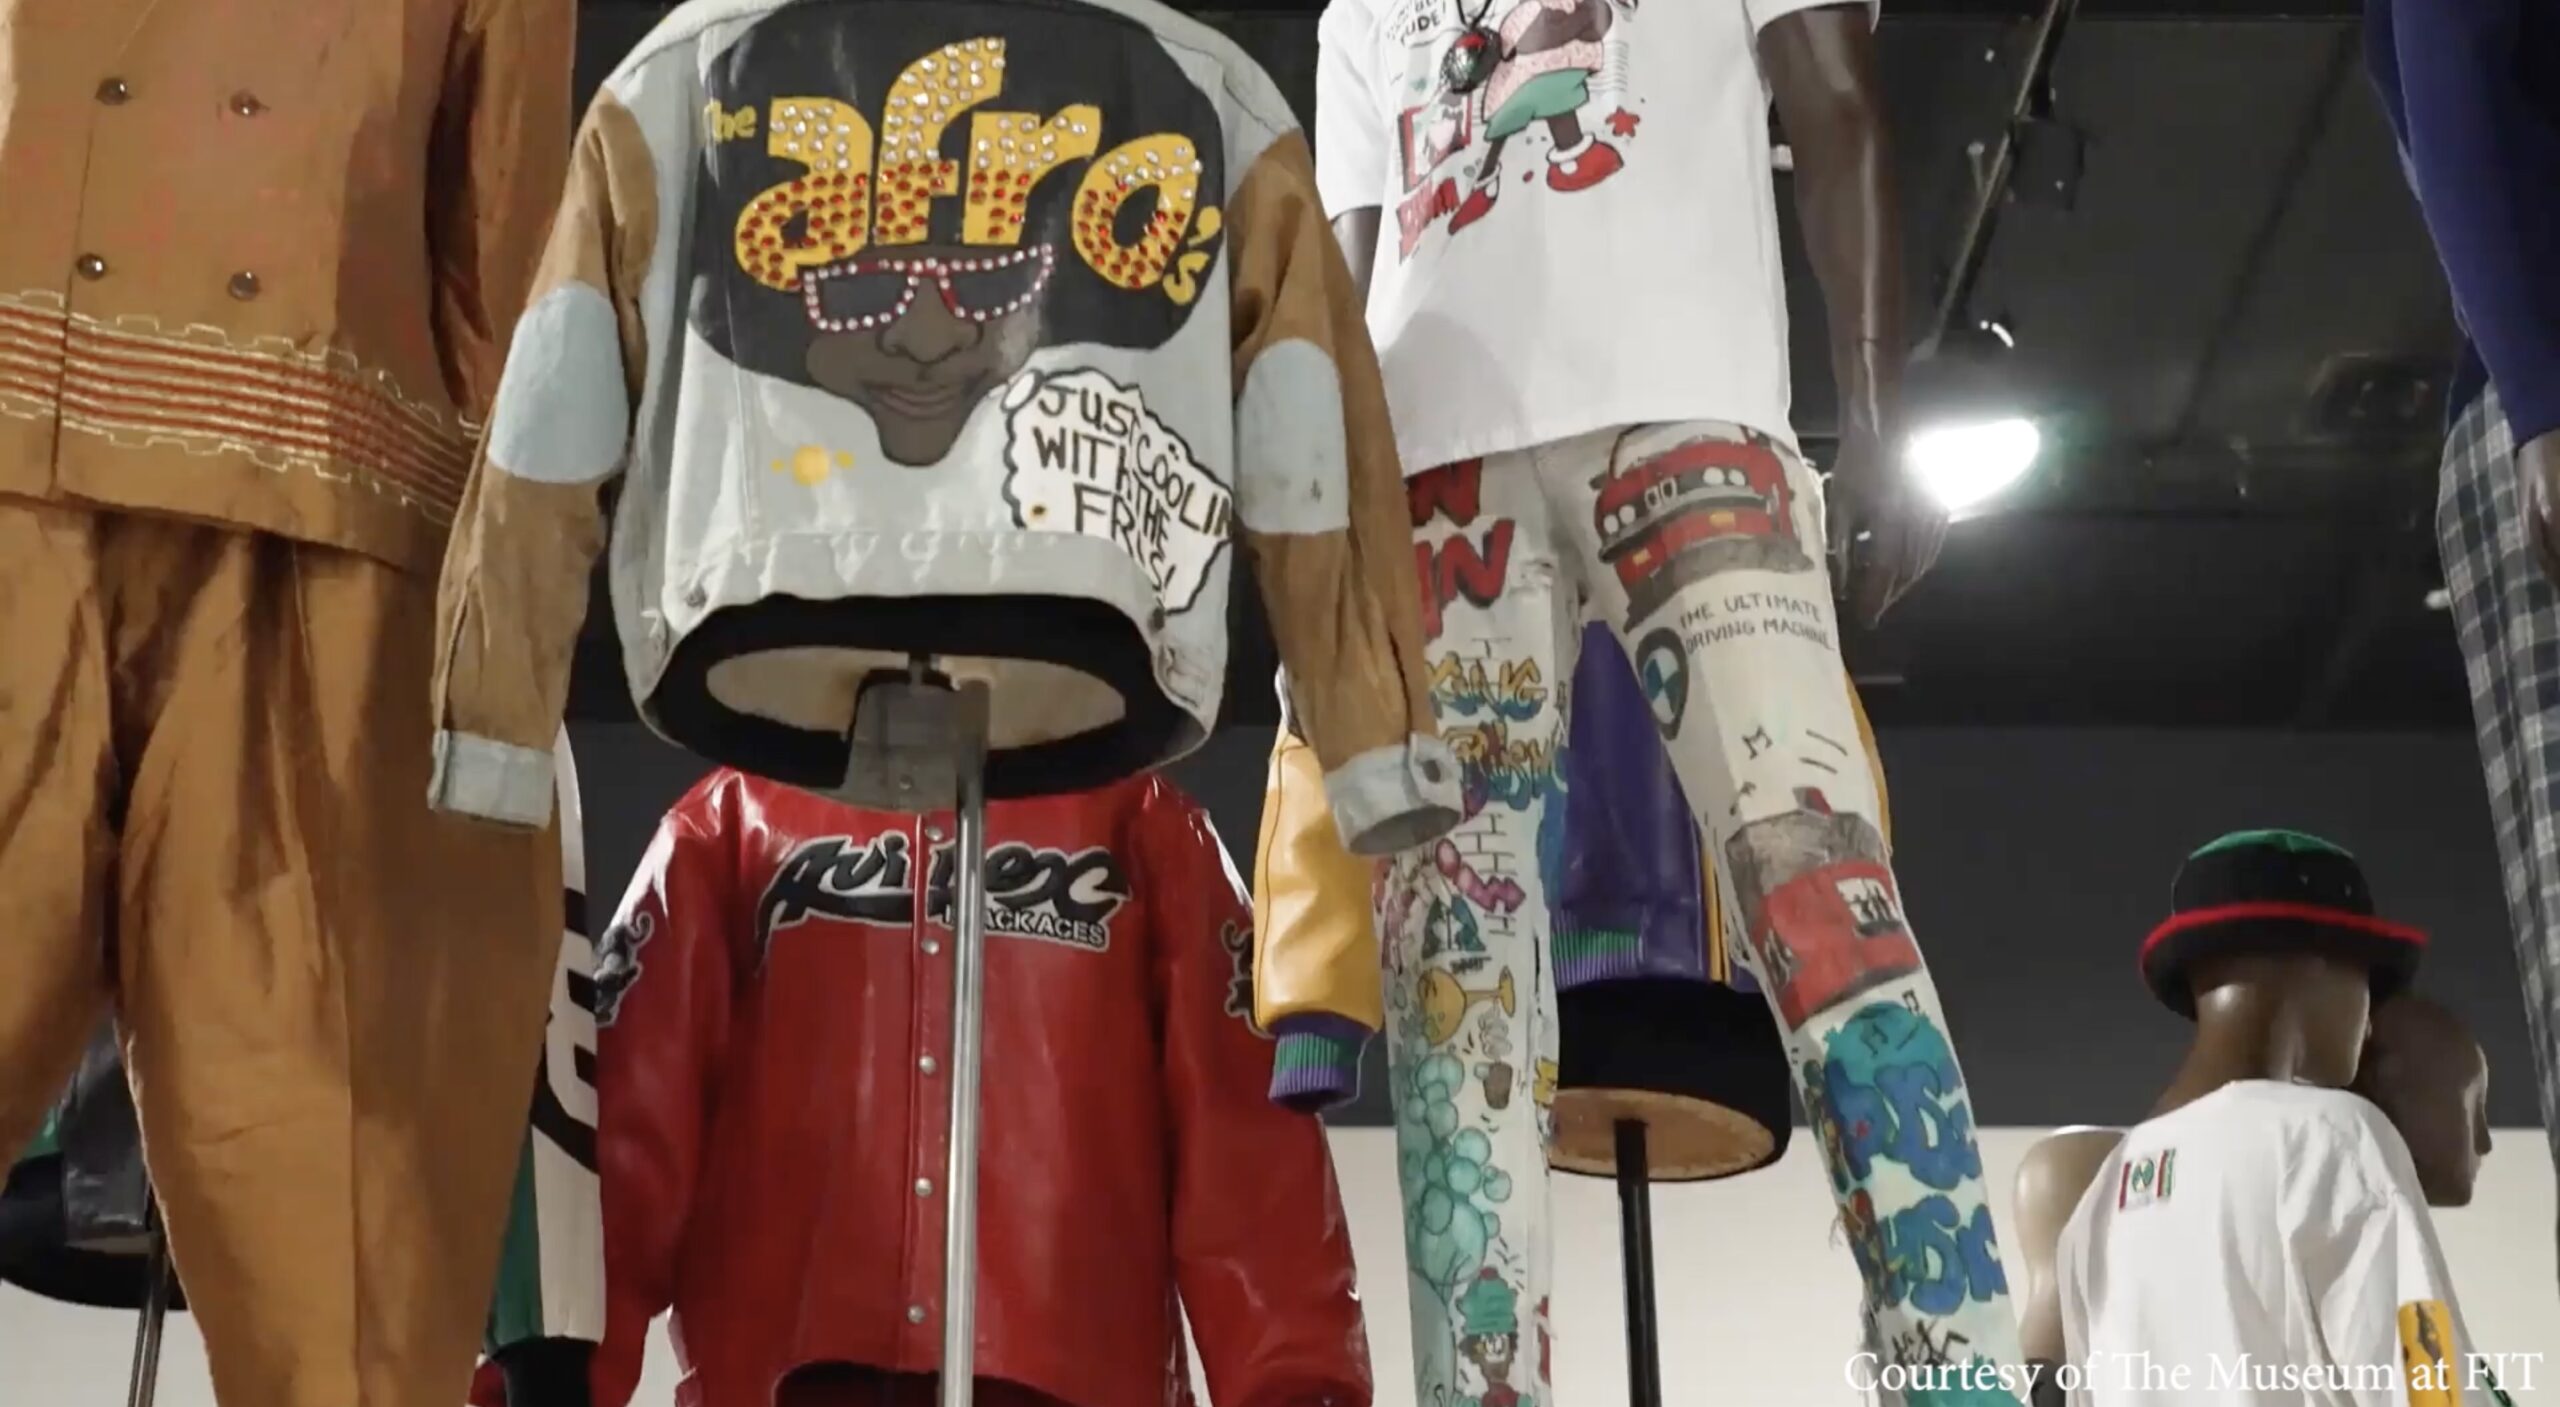 Image for The Museum at FIT Exhibits Hip-Hop Fashion